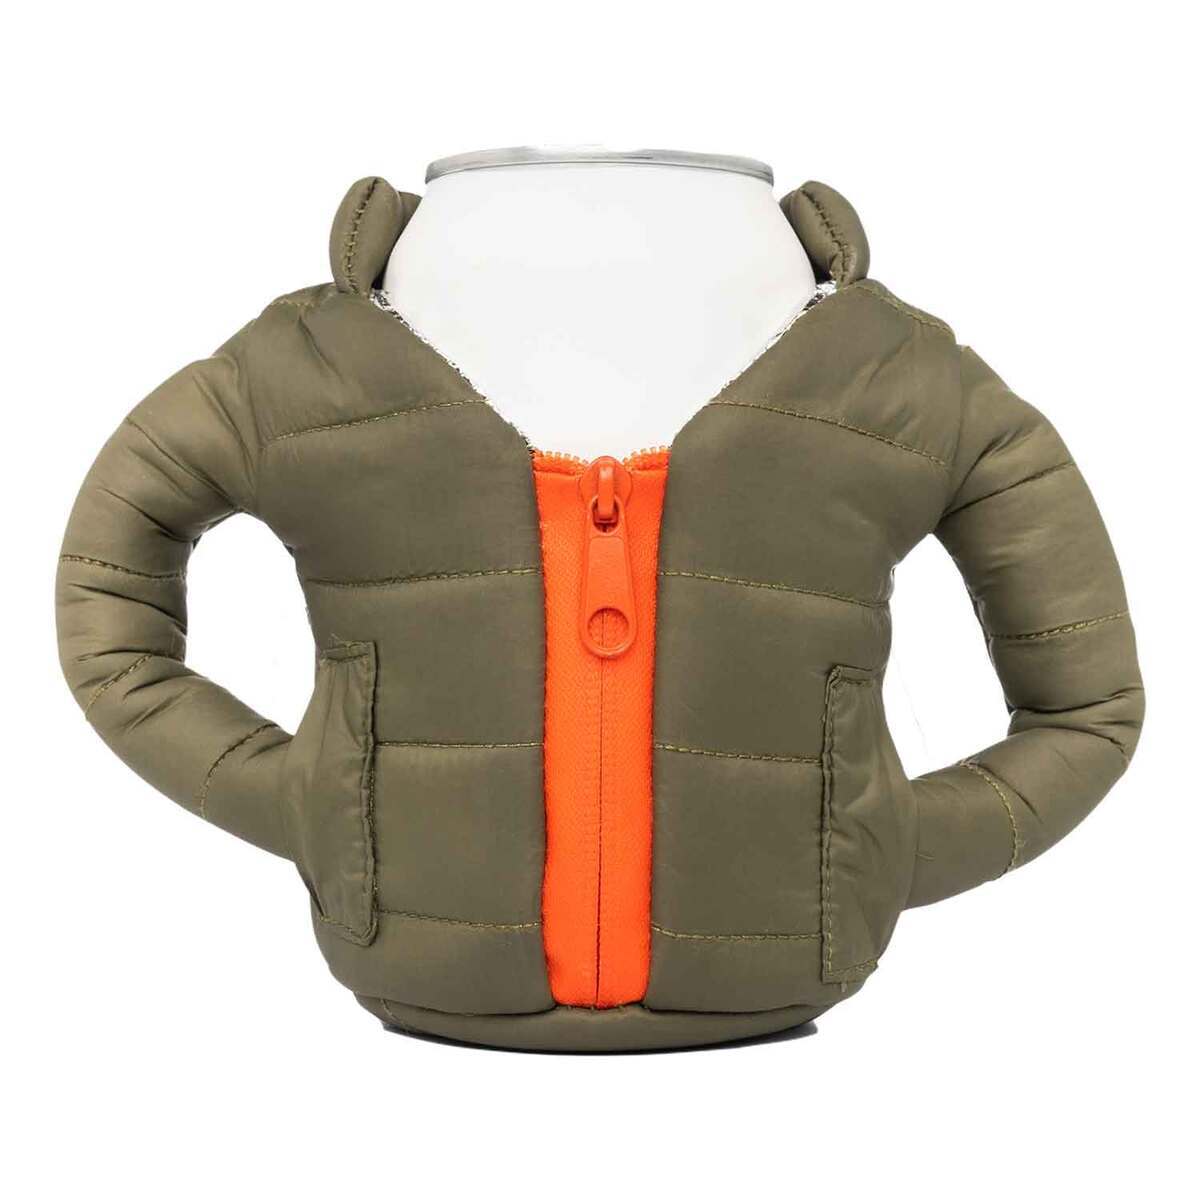 Puffin Coolers Beverage Jacket Cozy - Green and Orange | Sportsman's ...